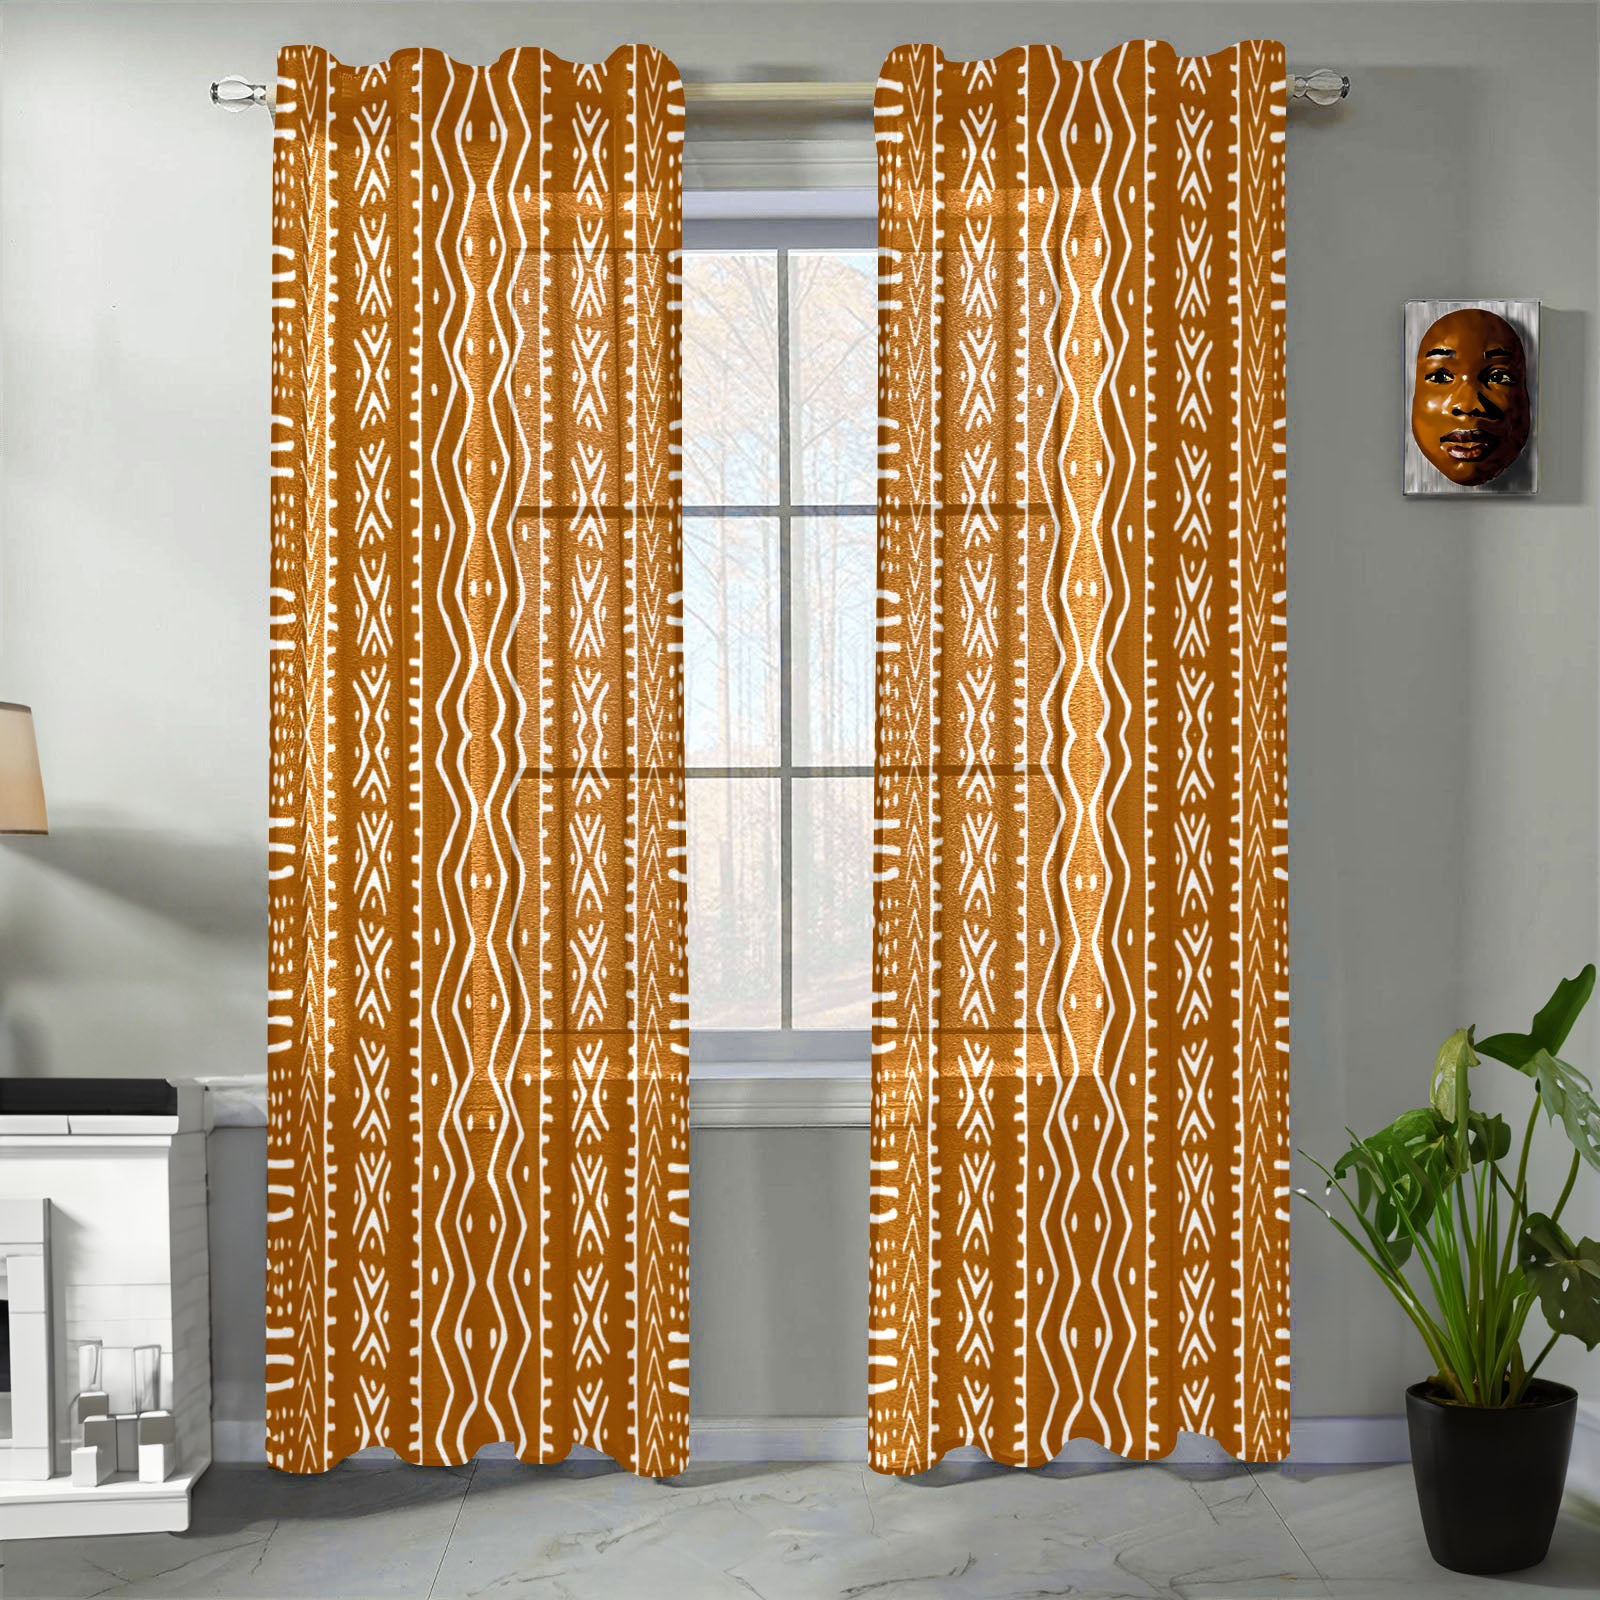 African Guaze Curtain Mudcloth Print (Two Piece)- Bynelo